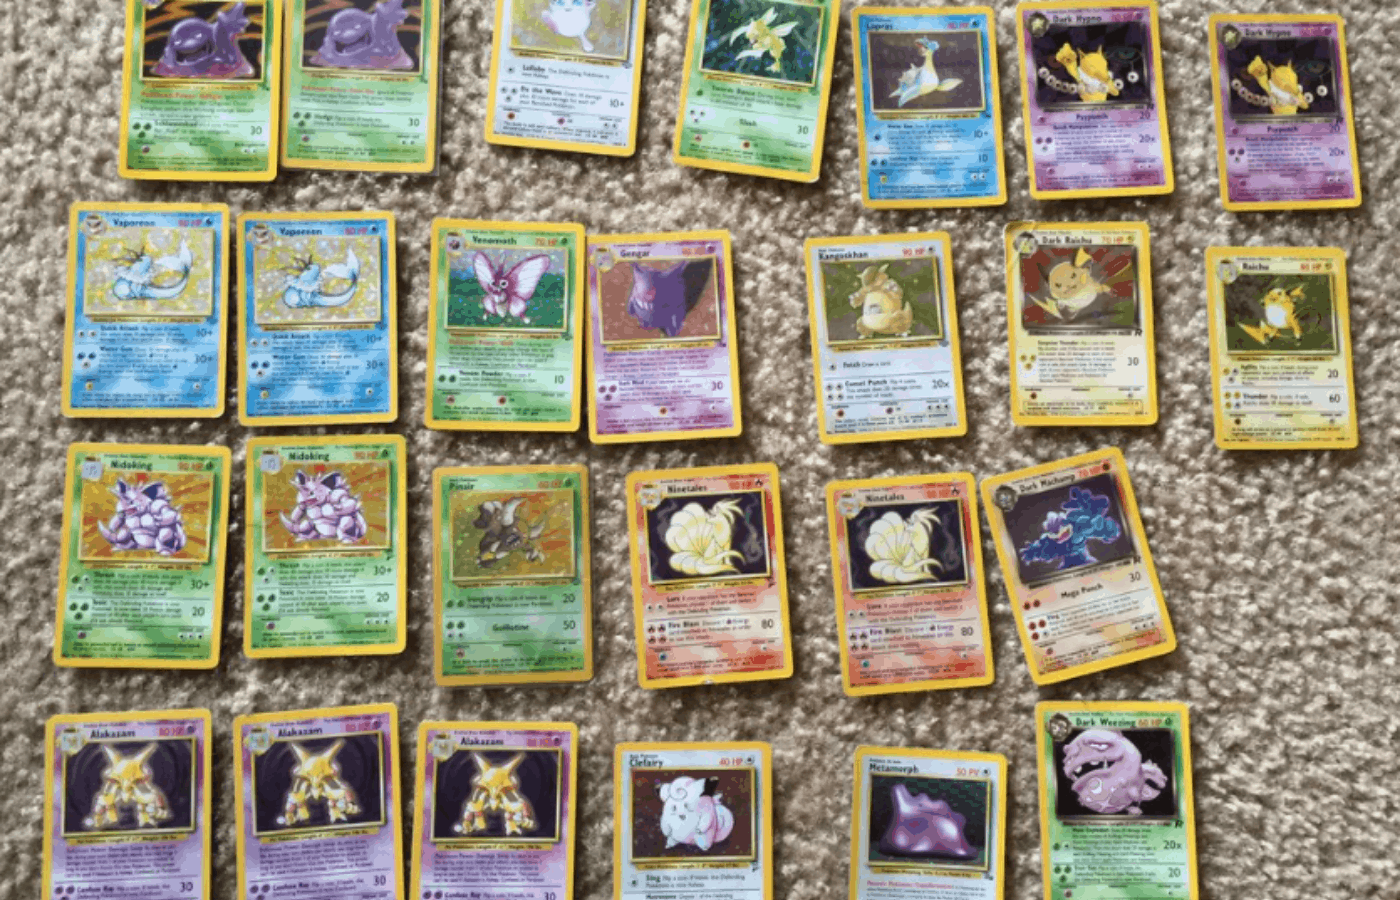 What to Do With Duplicate Pokemon Cards